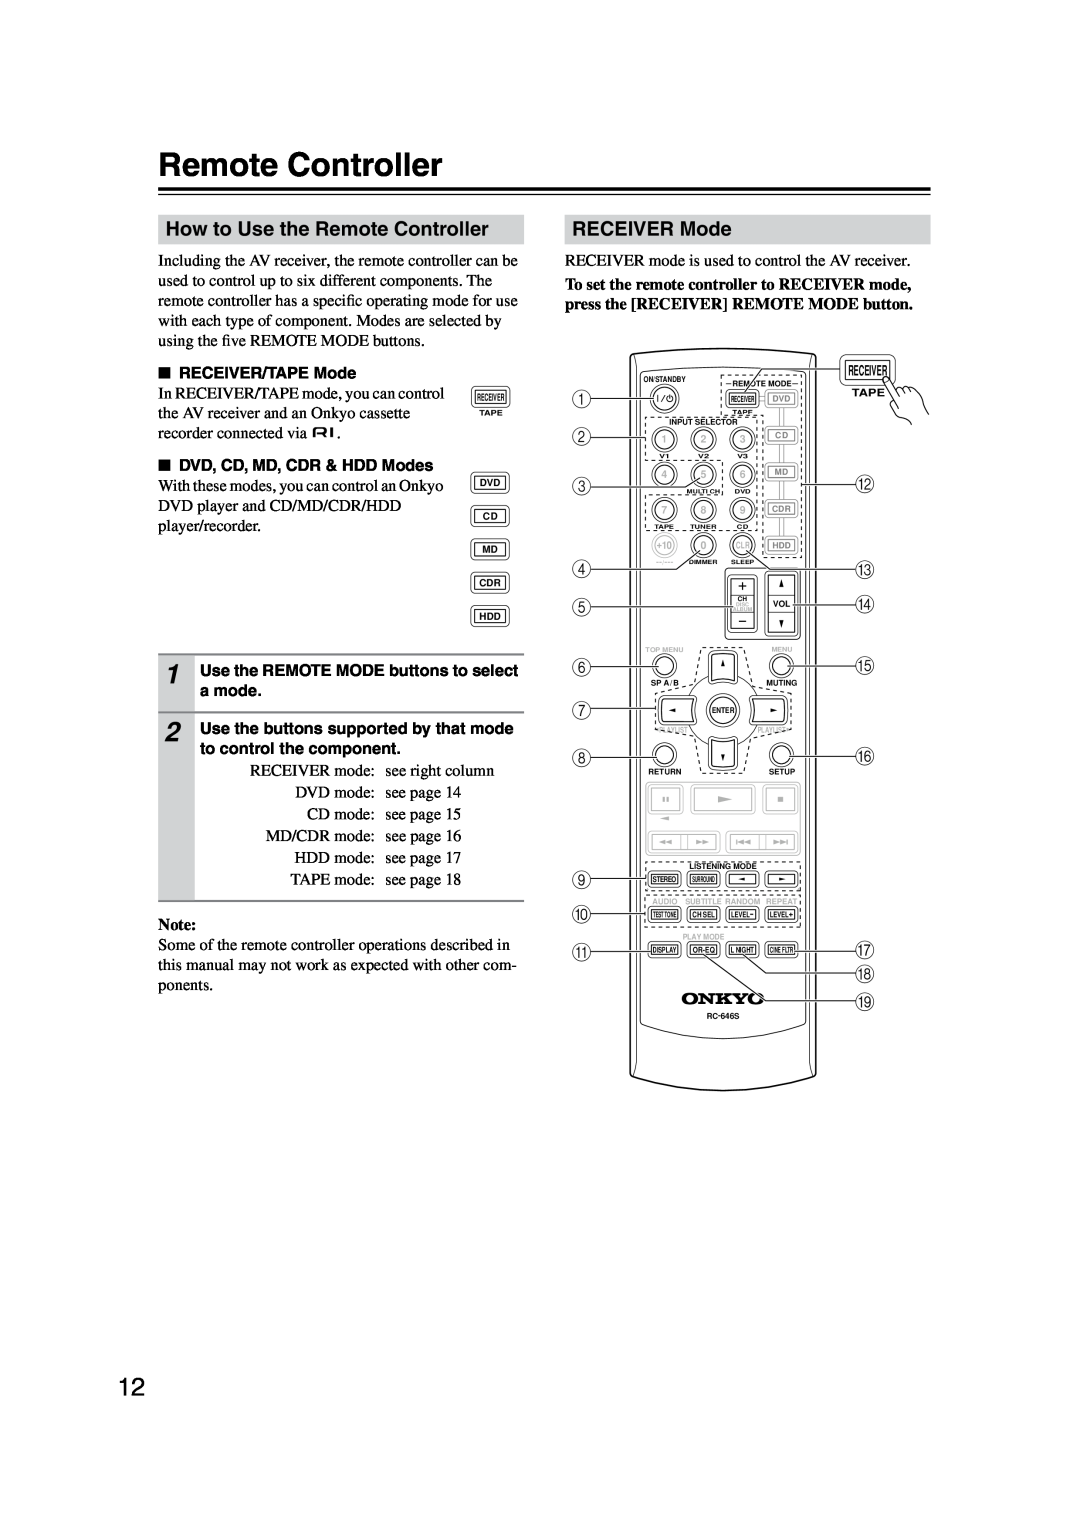 Onkyo HT-S590 instruction manual How to Use the Remote Controller, RECEIVER Mode 